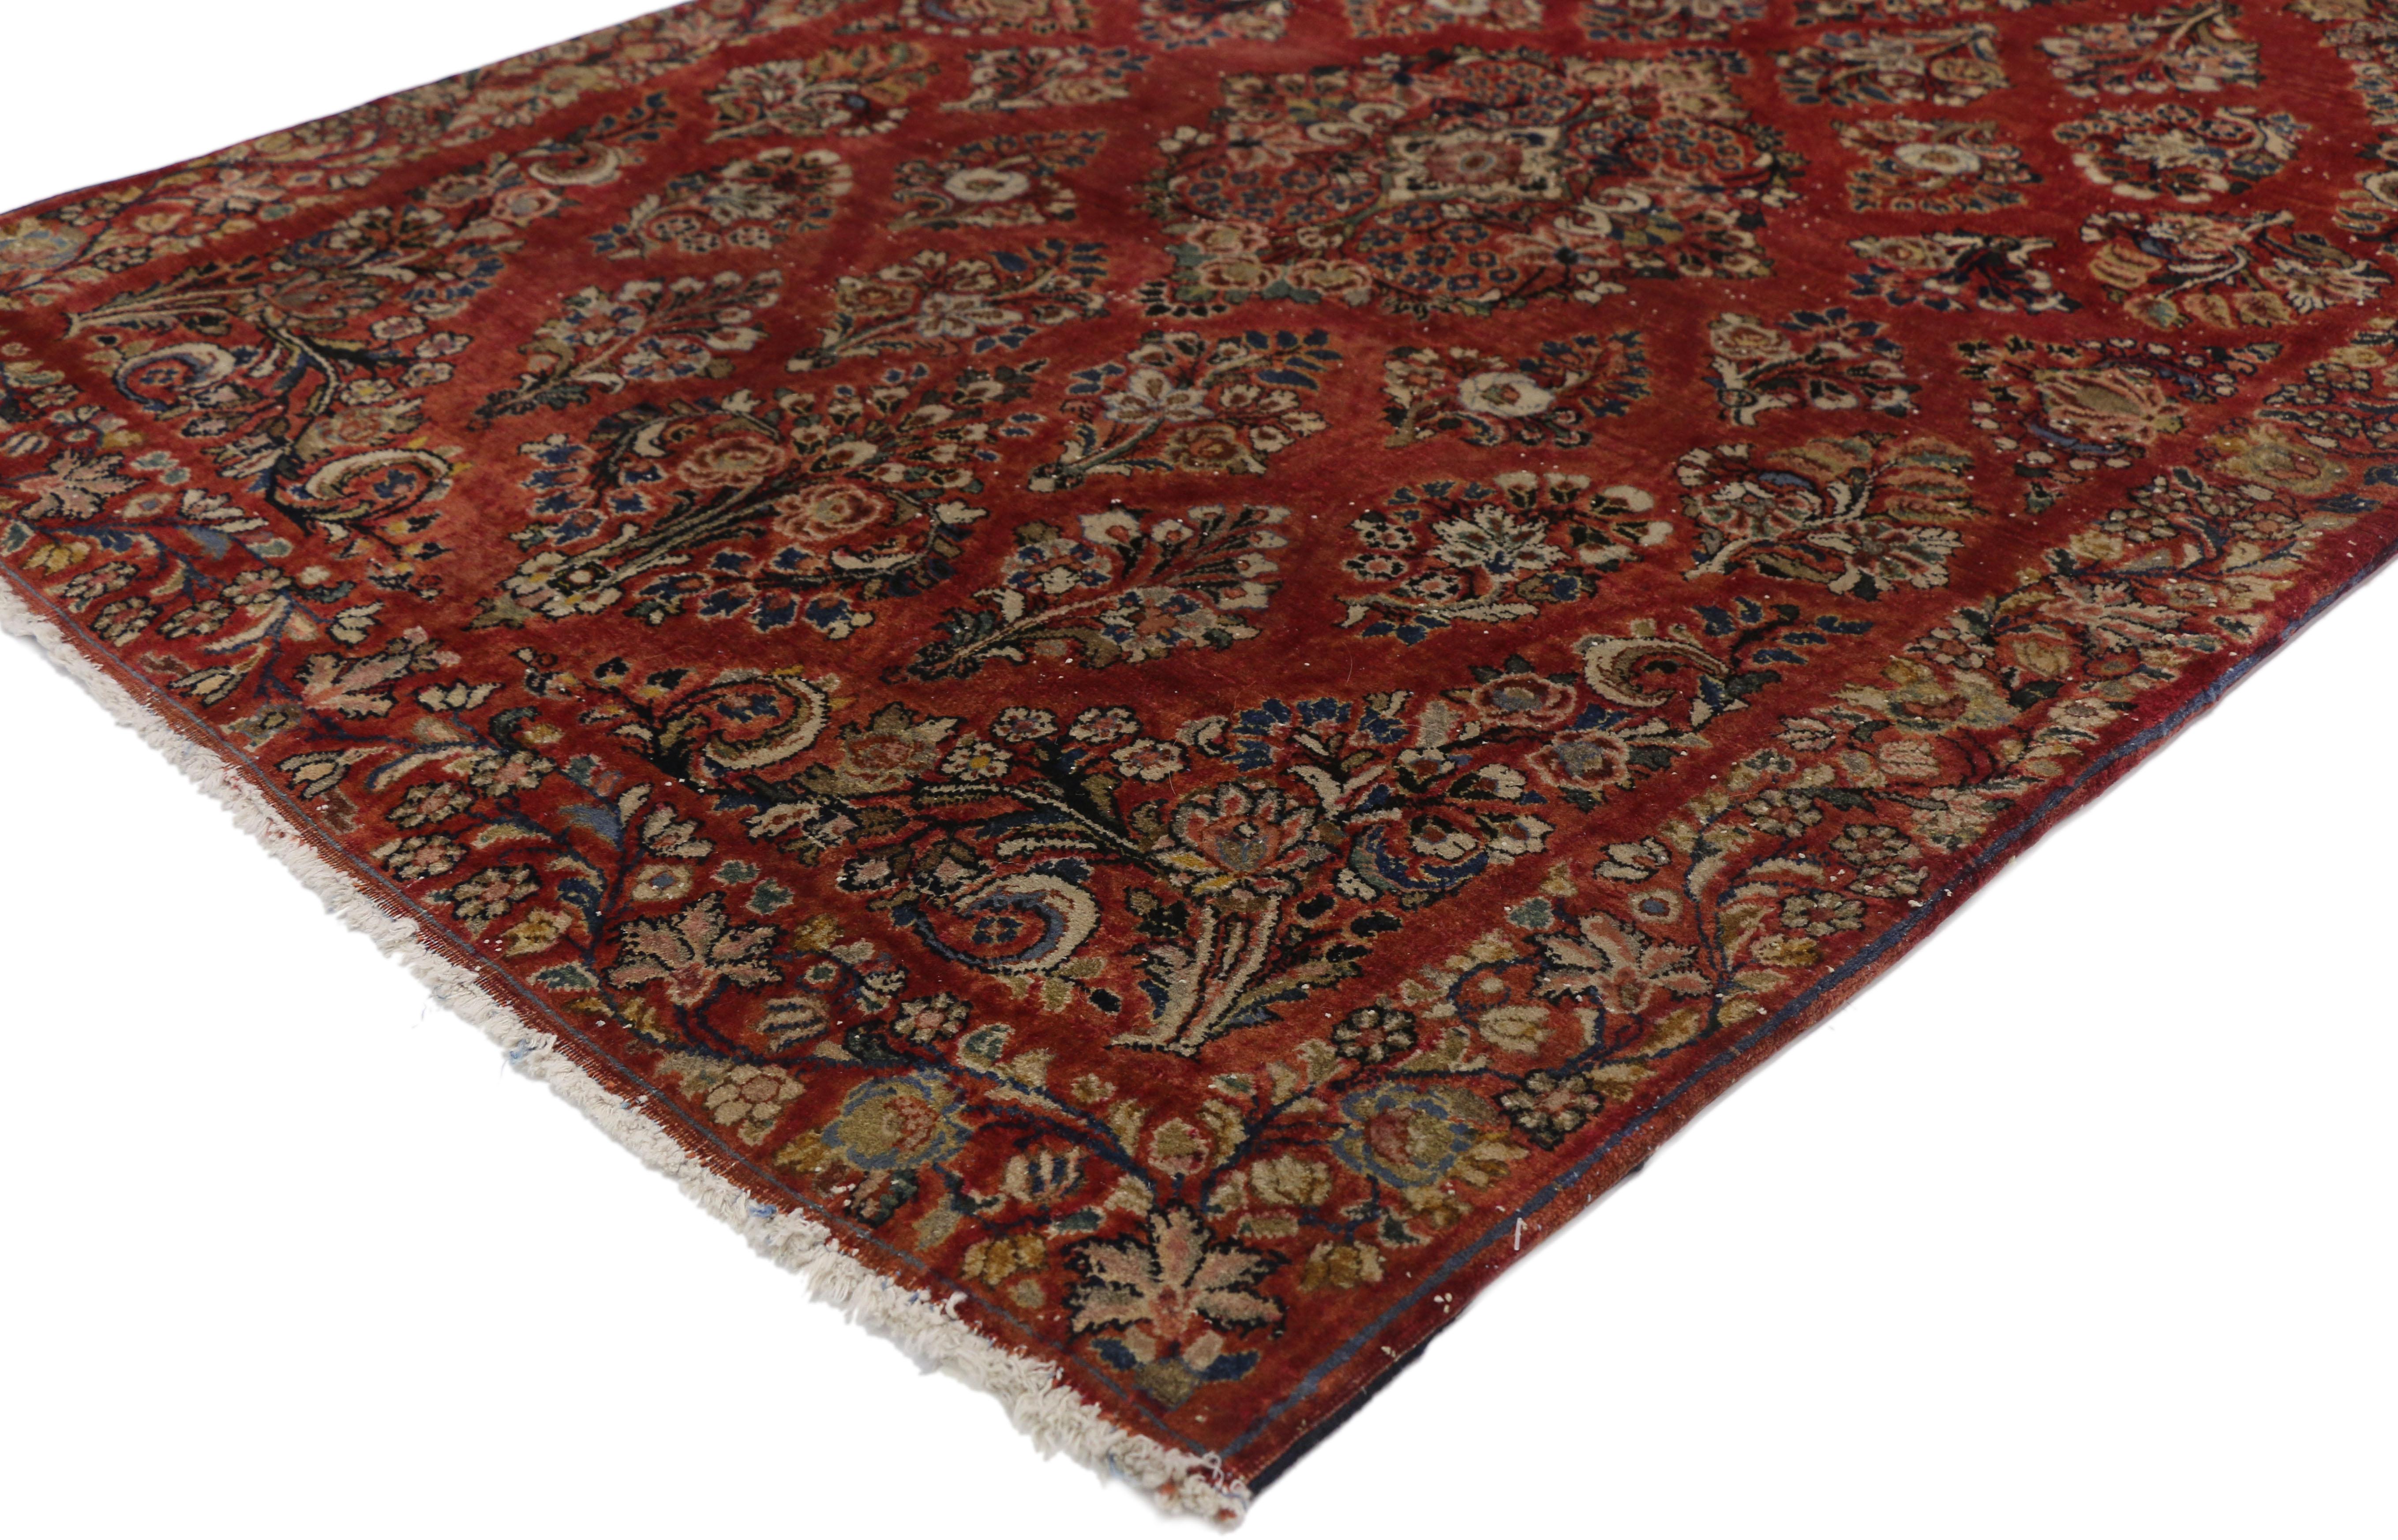 76921 Antique Sarouk Persian Rug with Old World Victorian Style. Immersed in Persian history, this highly desirable antique Sarouk Persian rug with traditional old world Victorian style features an impressive all-over floral spray pattern rendered